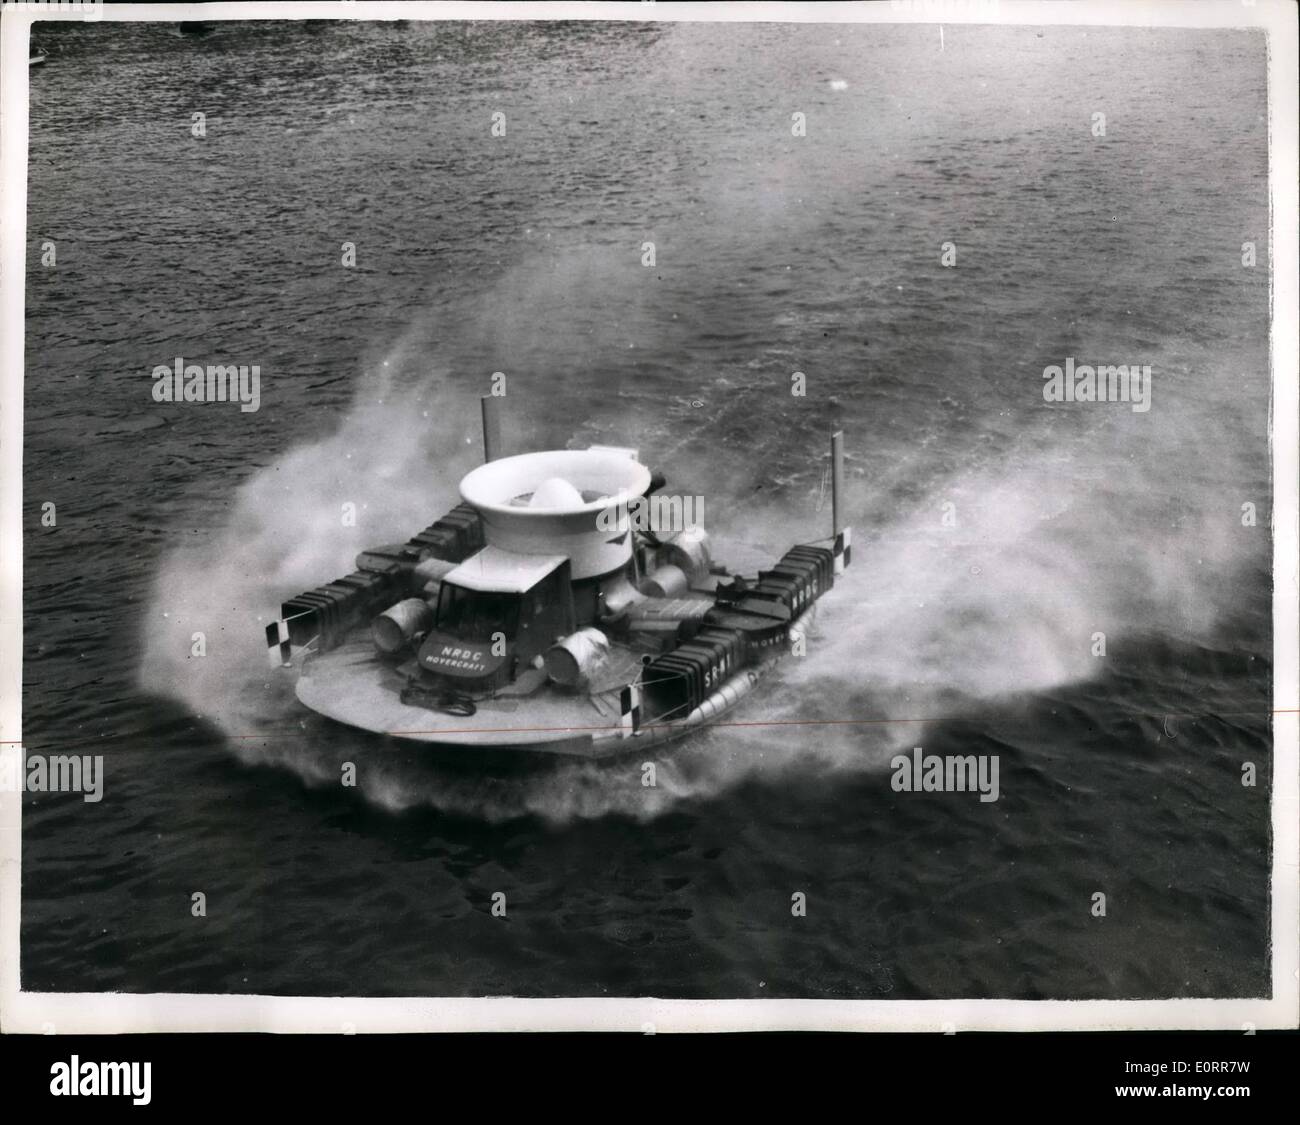 May 05, 1960 - The ''Hovercraft'' shows off its paces on the thames. Demonstration for M.P's and Commonwealth Prime Ministers: The SR-N1 Hovercraft showed off its paces this afternoon on the River Thames - in front of the Houses of Parliament - for the benefit of M.P's and Commonwealth Prime Ministers assembled there. The demonstration is hoped to 'clear the way for its eventual use for commercial and other purposes''. This is the first public showing of the craft since the Farnborough Air Show last year Stock Photo